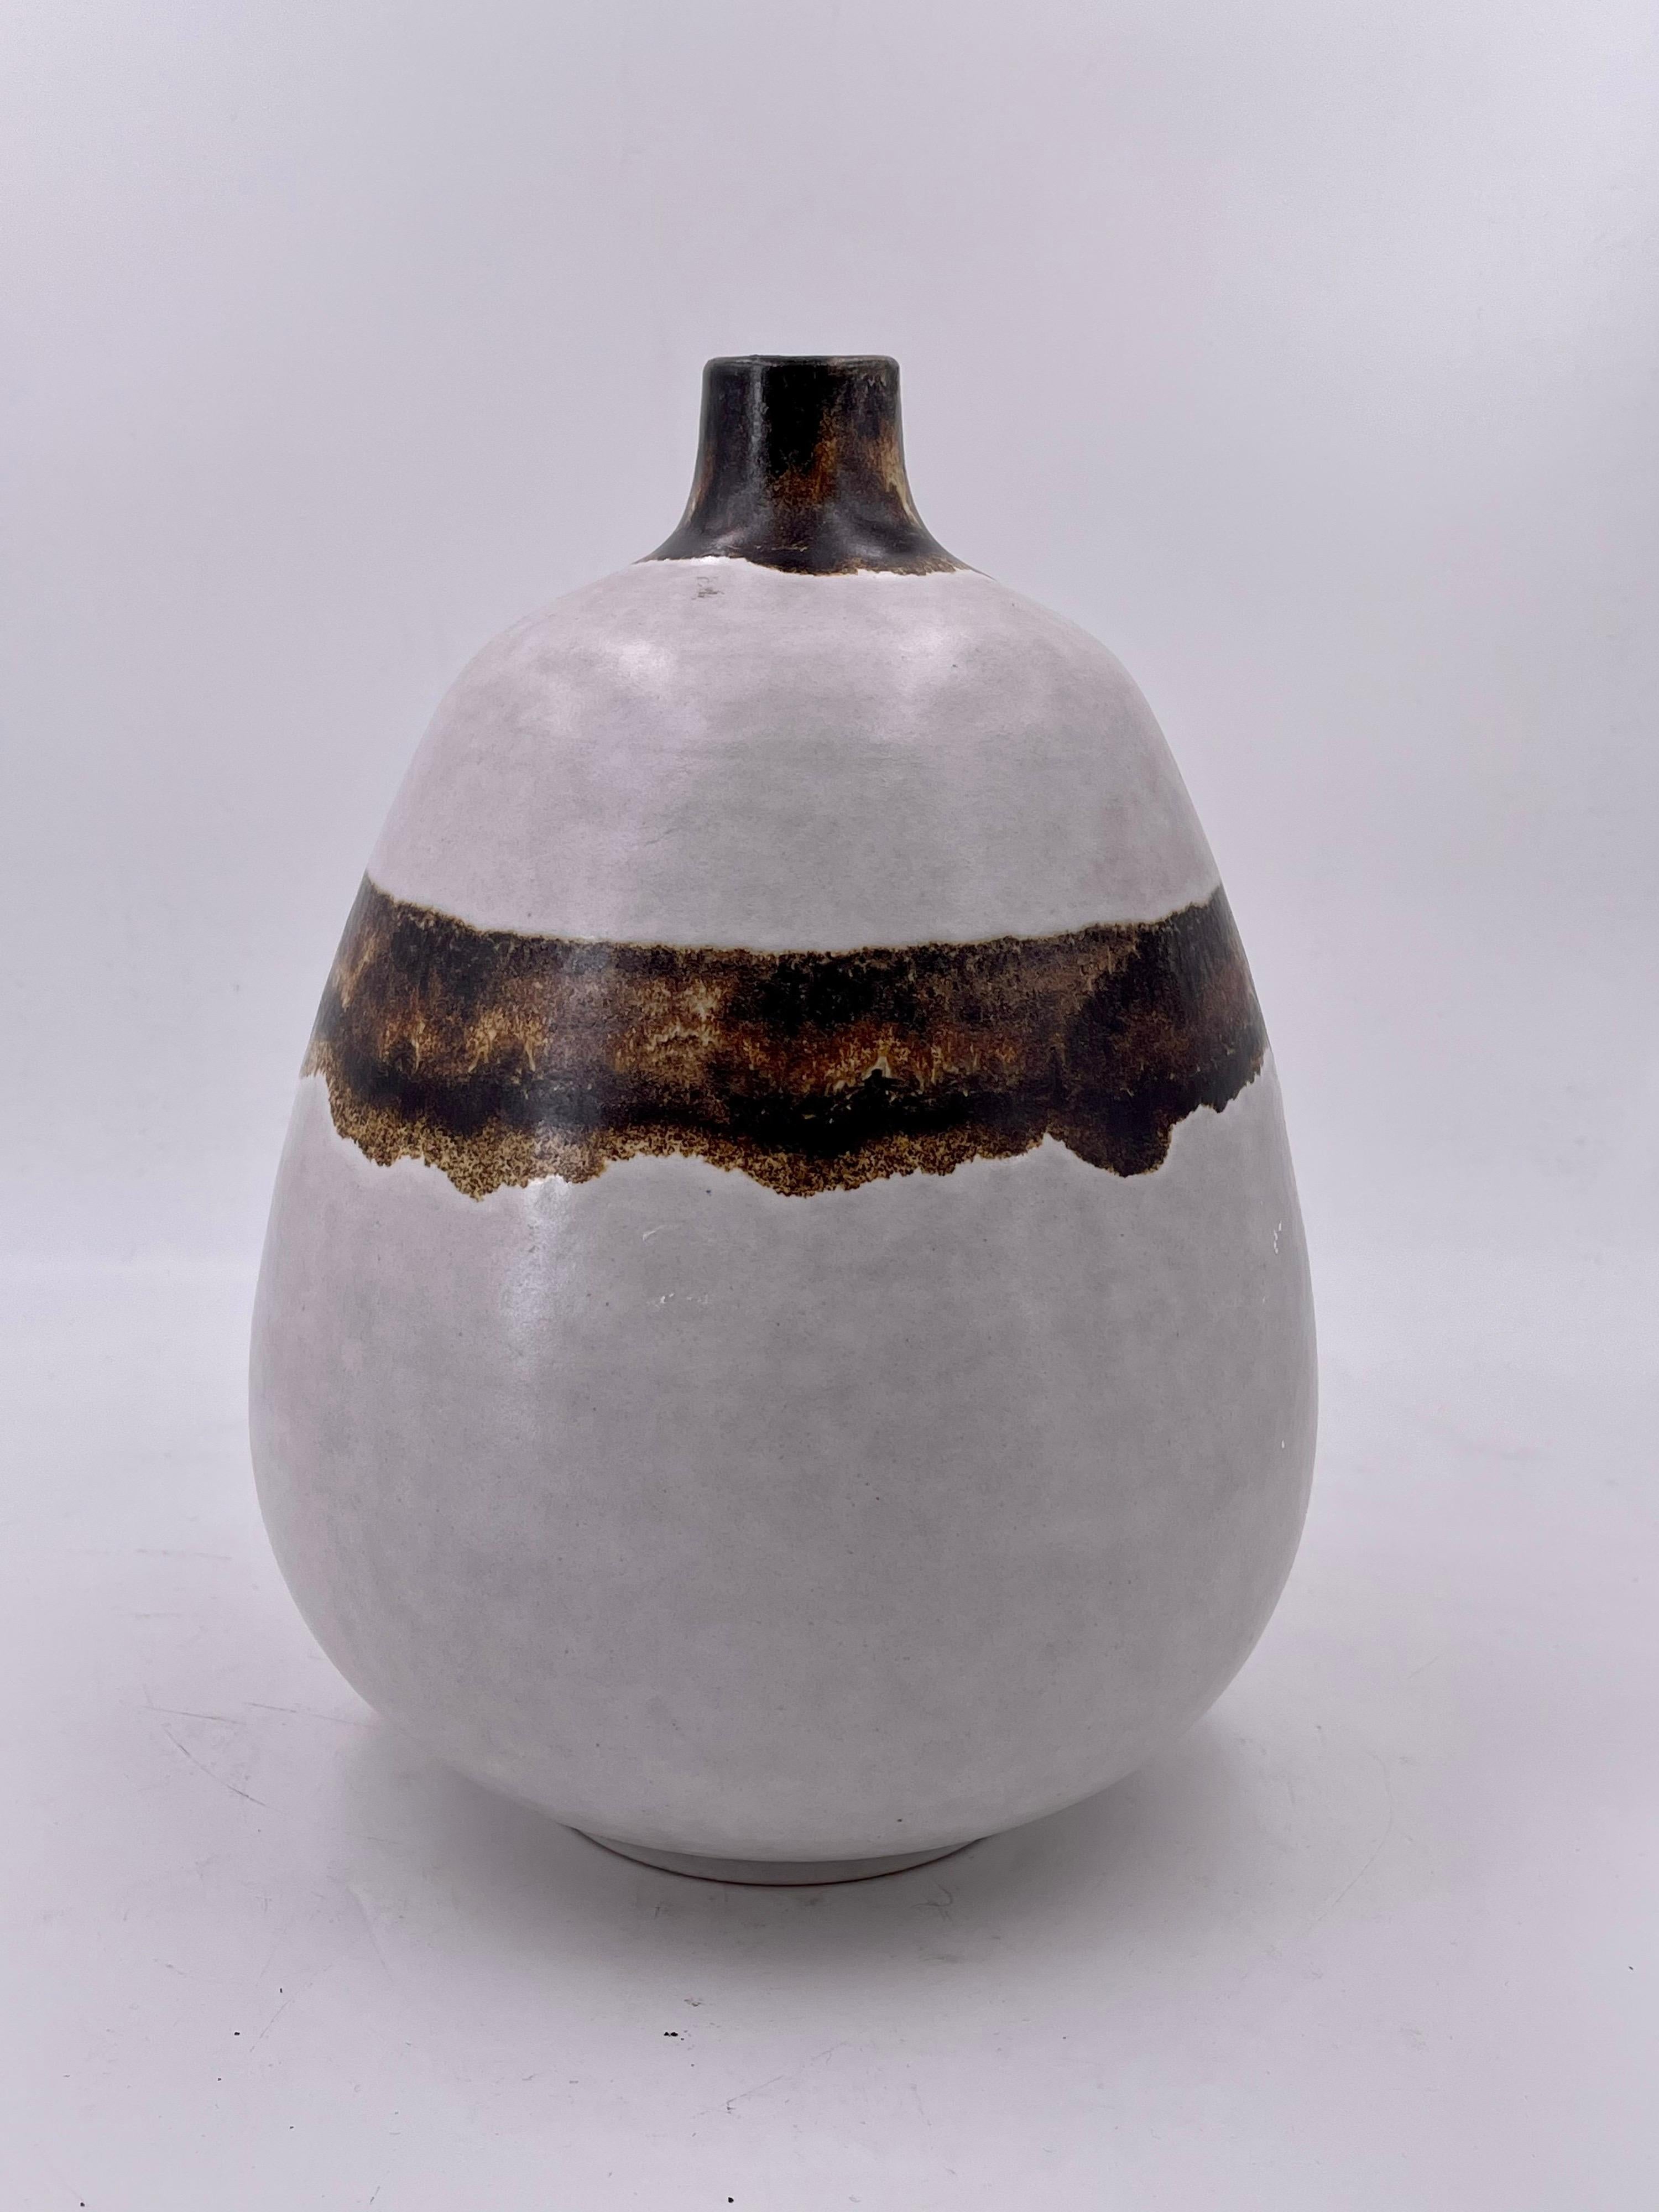 Beautiful glaze, brown and grey color combination on this vase by Bitossi for Raymor Imports, circa 1960s. The piece is quite unique and was made in Italy; great decor piece for any Mid-Century Modern setting.